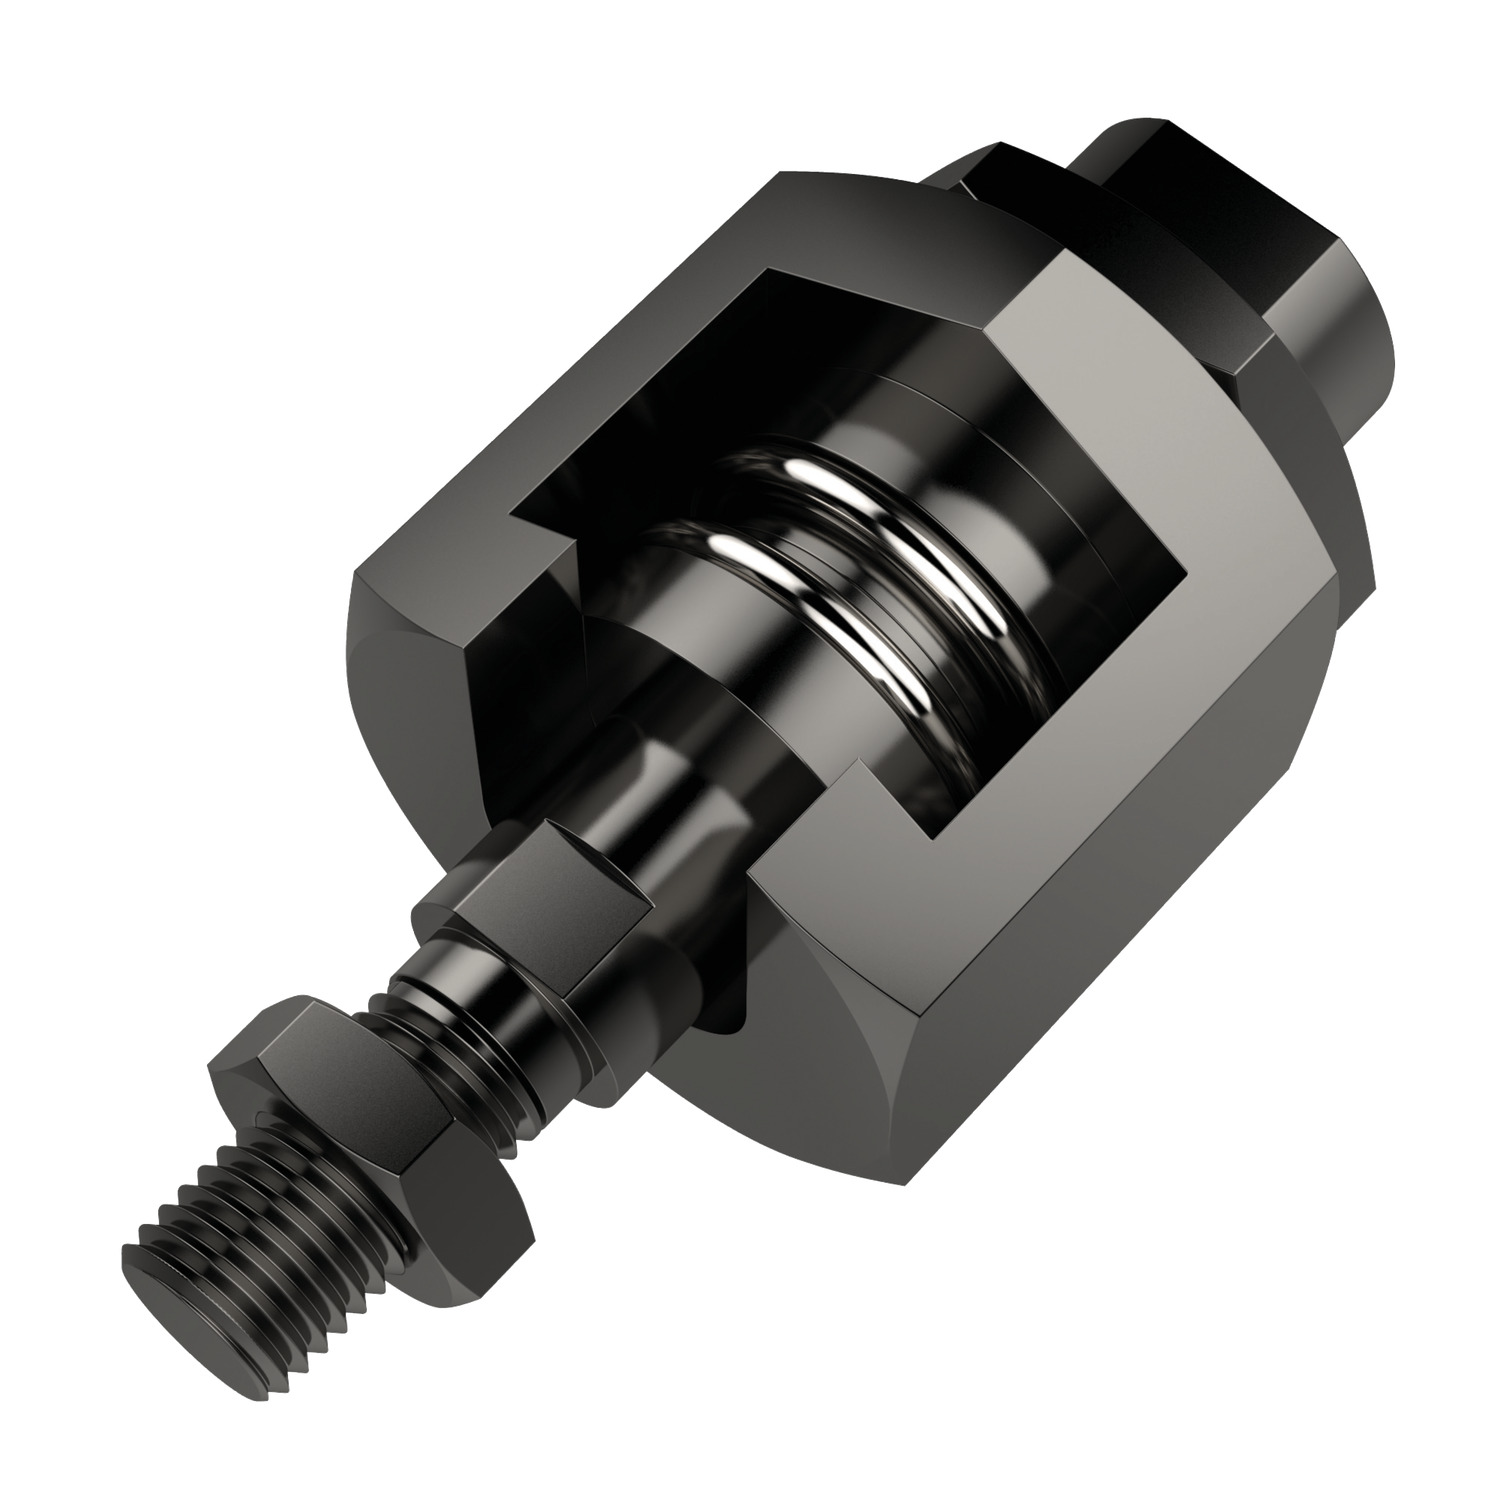 Product 64700, Quick Plug Couplings with angular radial offset compensation / 